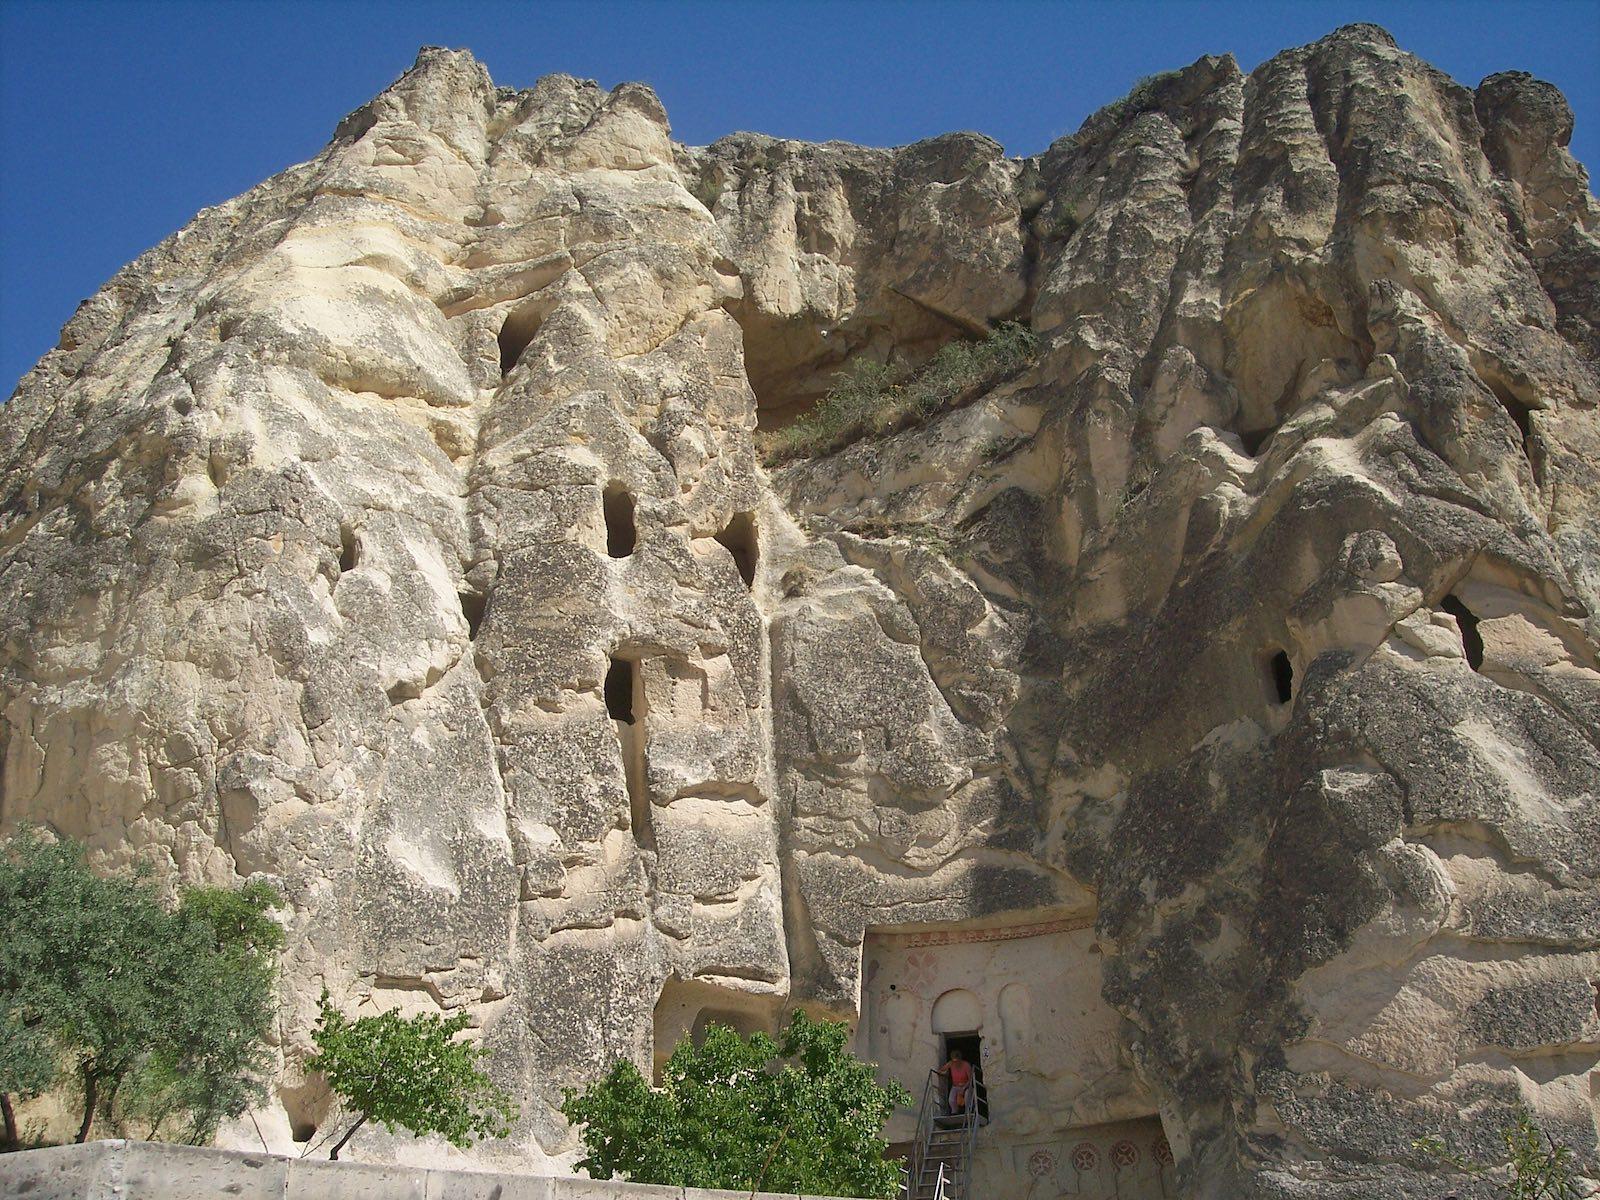 Exterior view of the rock-hewn Sandals Church (or Carikli Kilise), named for the two footprints found by the fresco at the entrance.